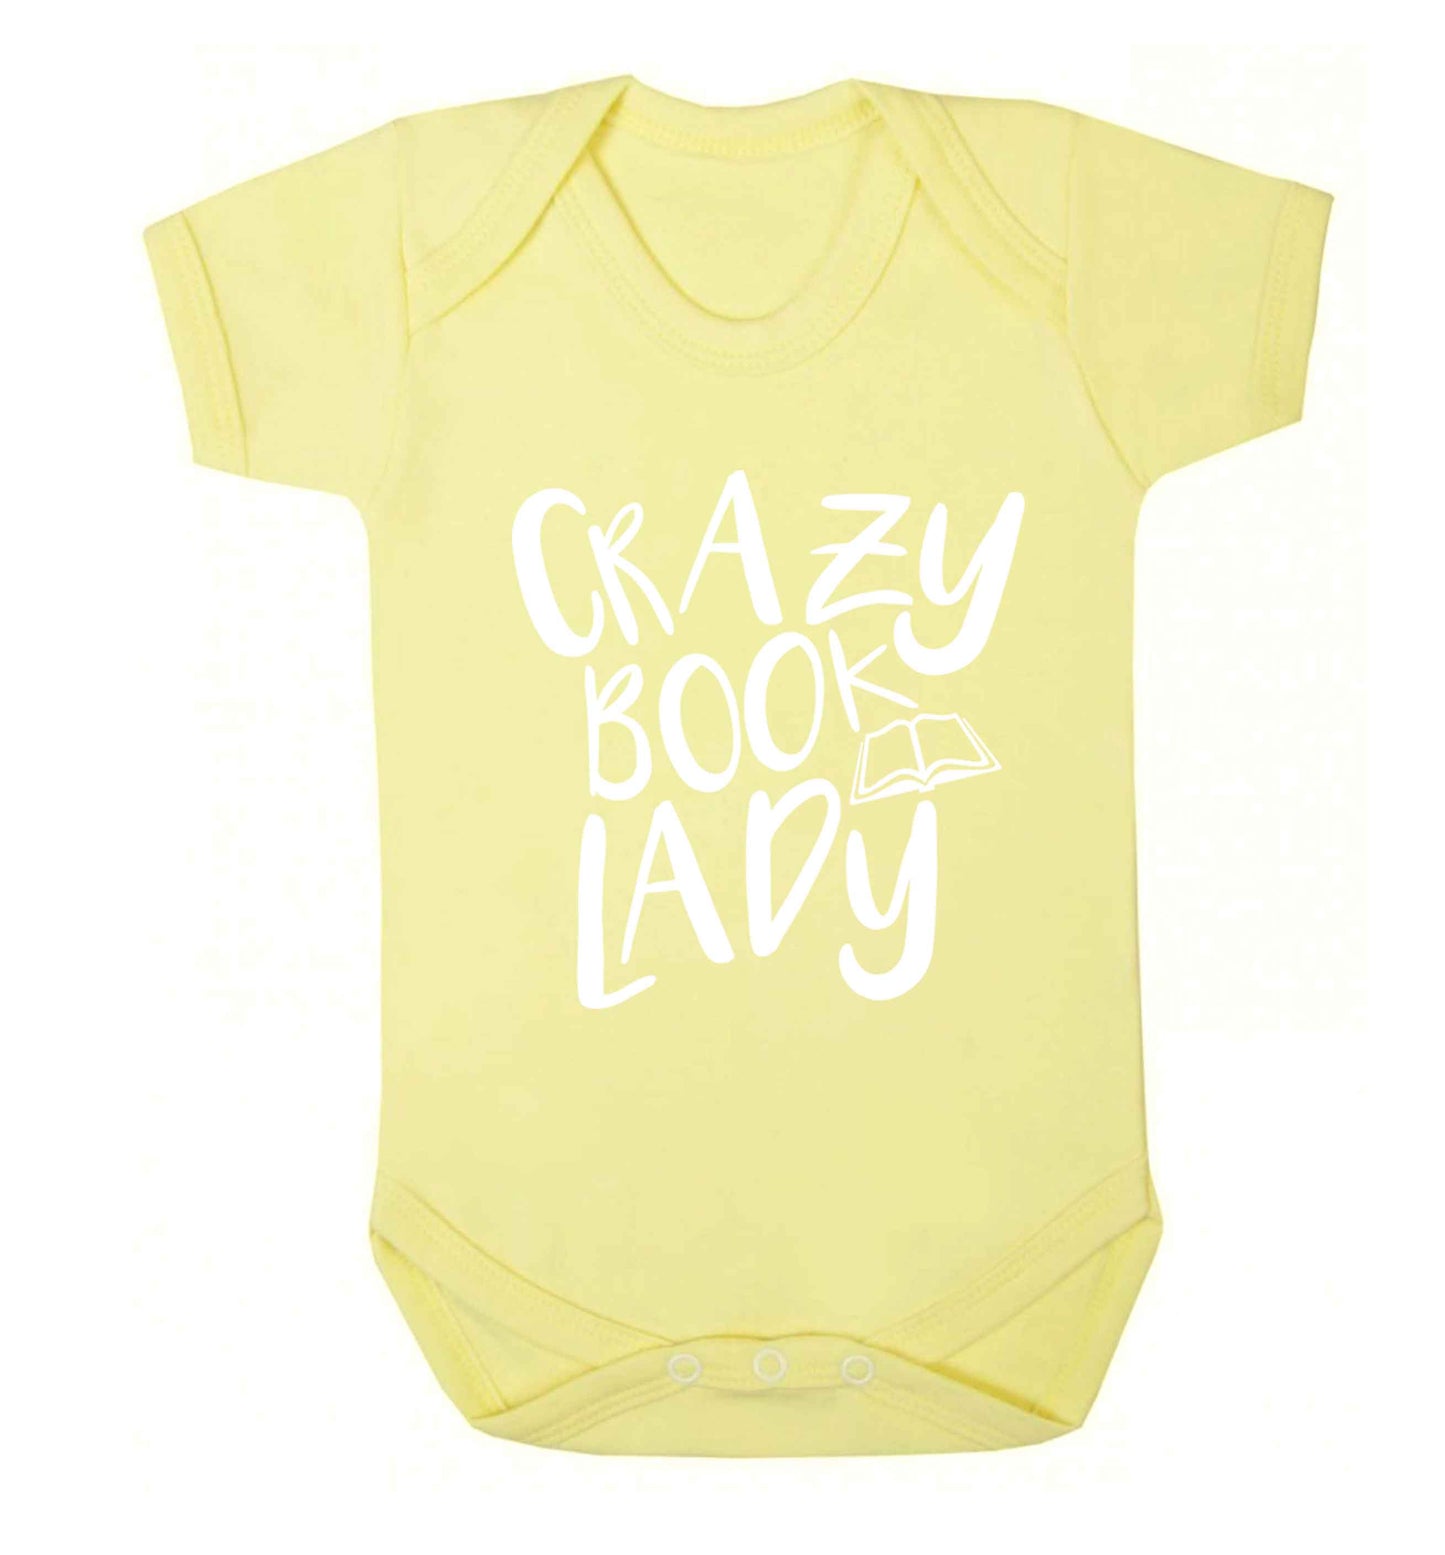 Crazy book lady Baby Vest pale yellow 18-24 months